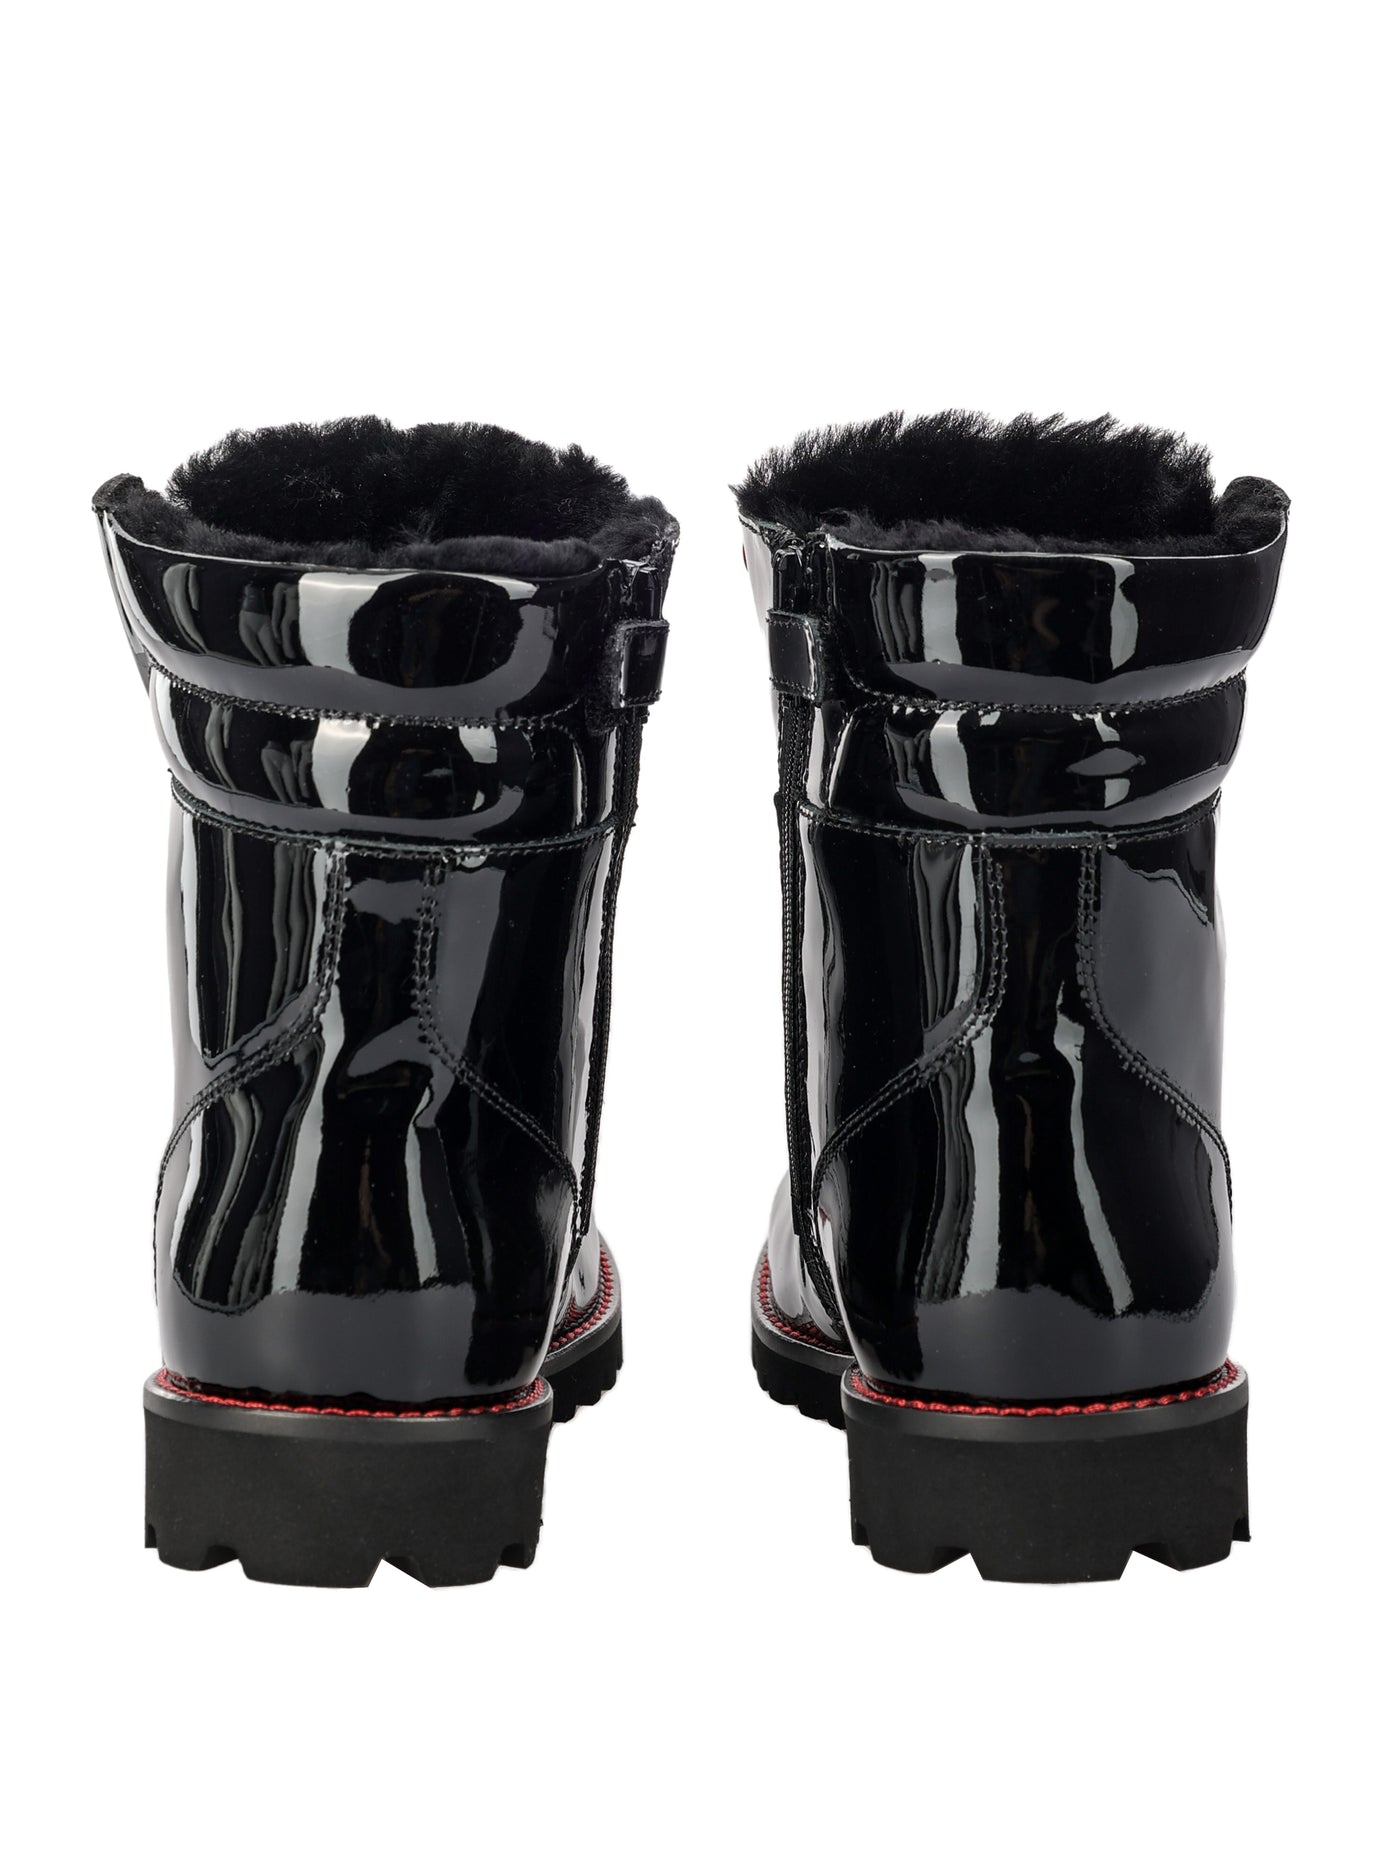 DOLCE & GABBANA LEATHER KIDS ANKLE BOOTS